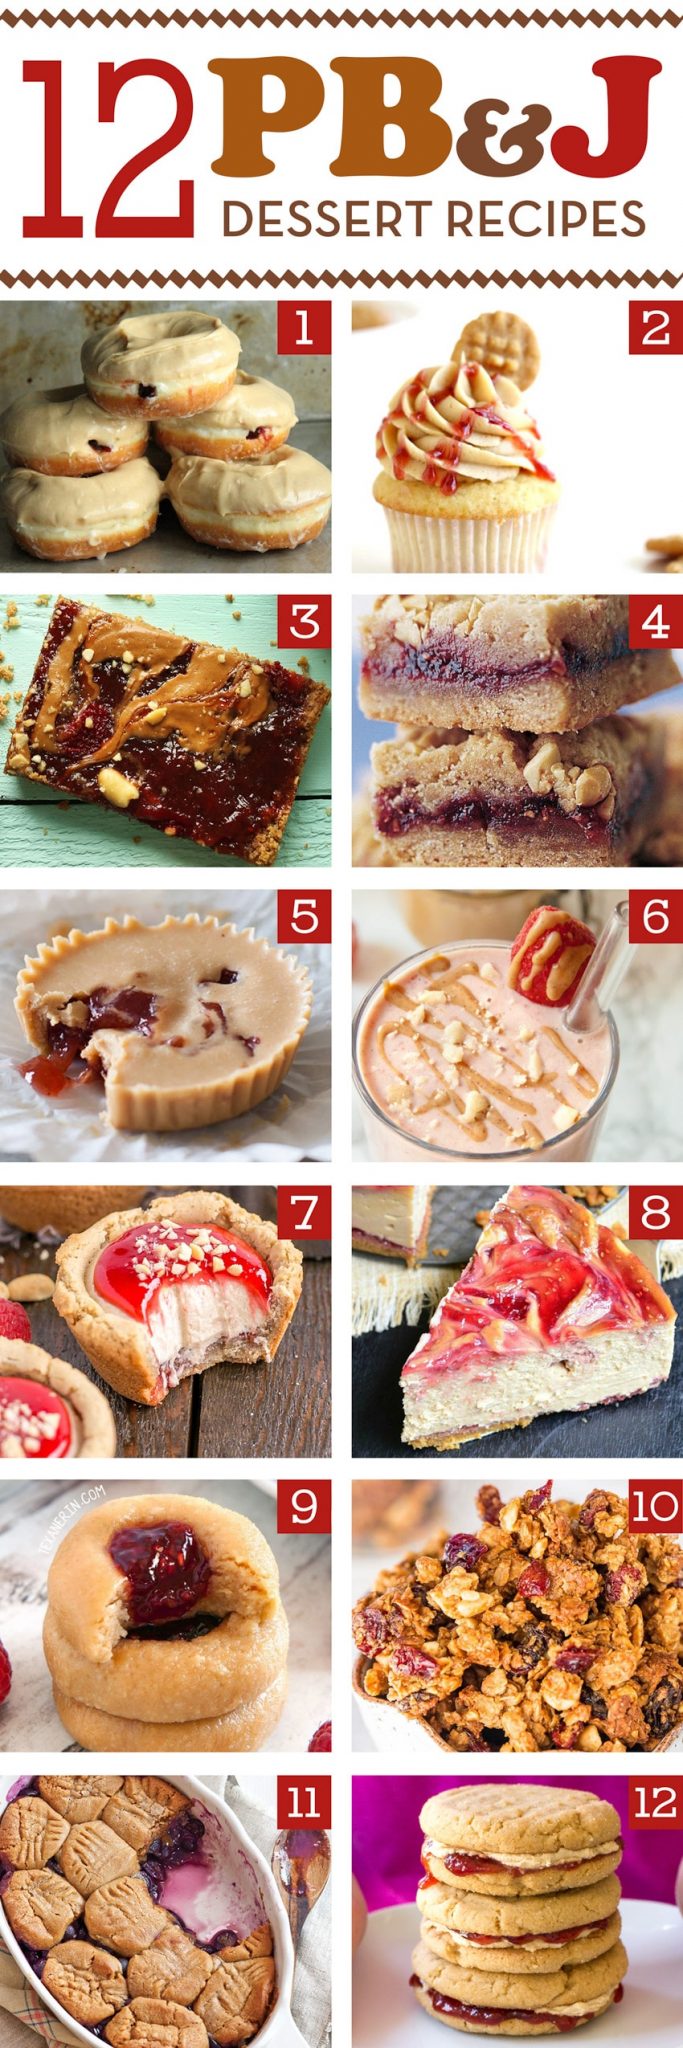 12 peanut butter and jelly recipes you need to try